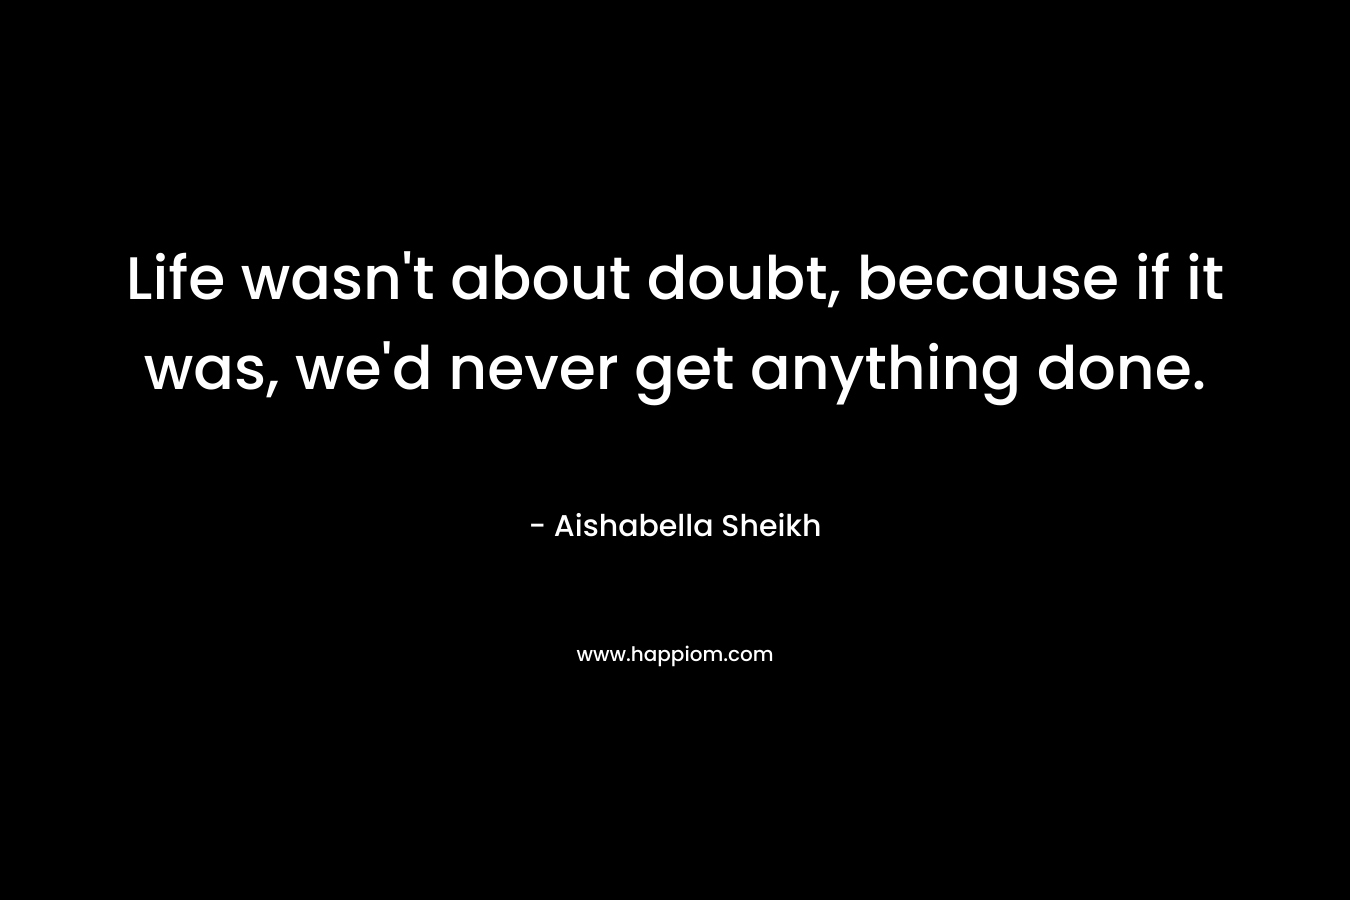 Life wasn’t about doubt, because if it was, we’d never get anything done. – Aishabella Sheikh